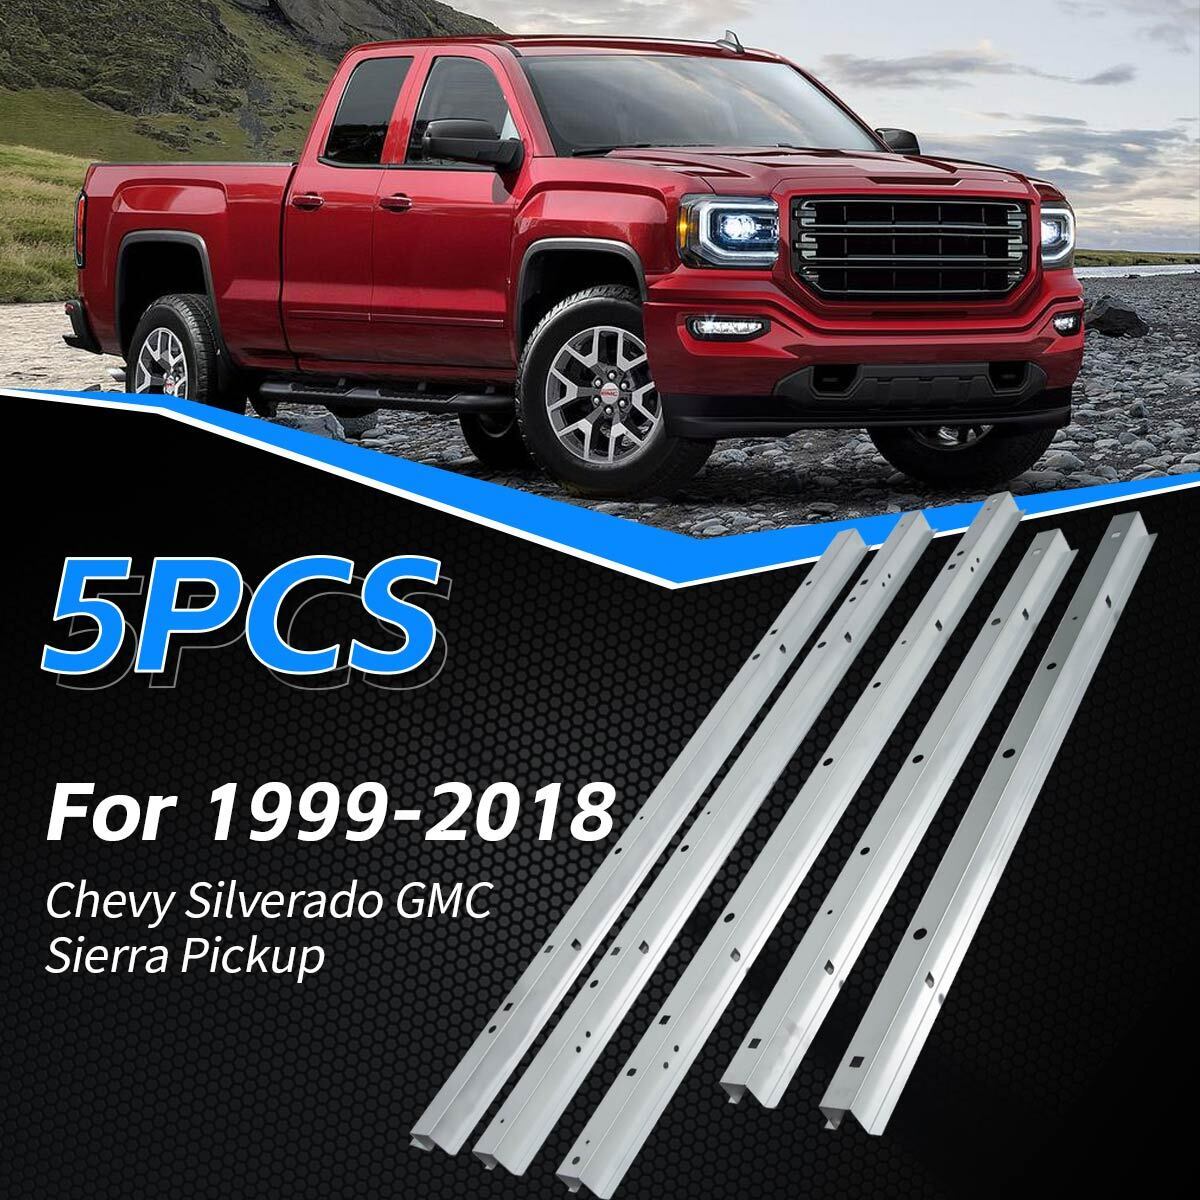 5PCS Truck Bed Floor Support For 1999-2018 Chevy Silverado GMC Sierra Pickup NEW